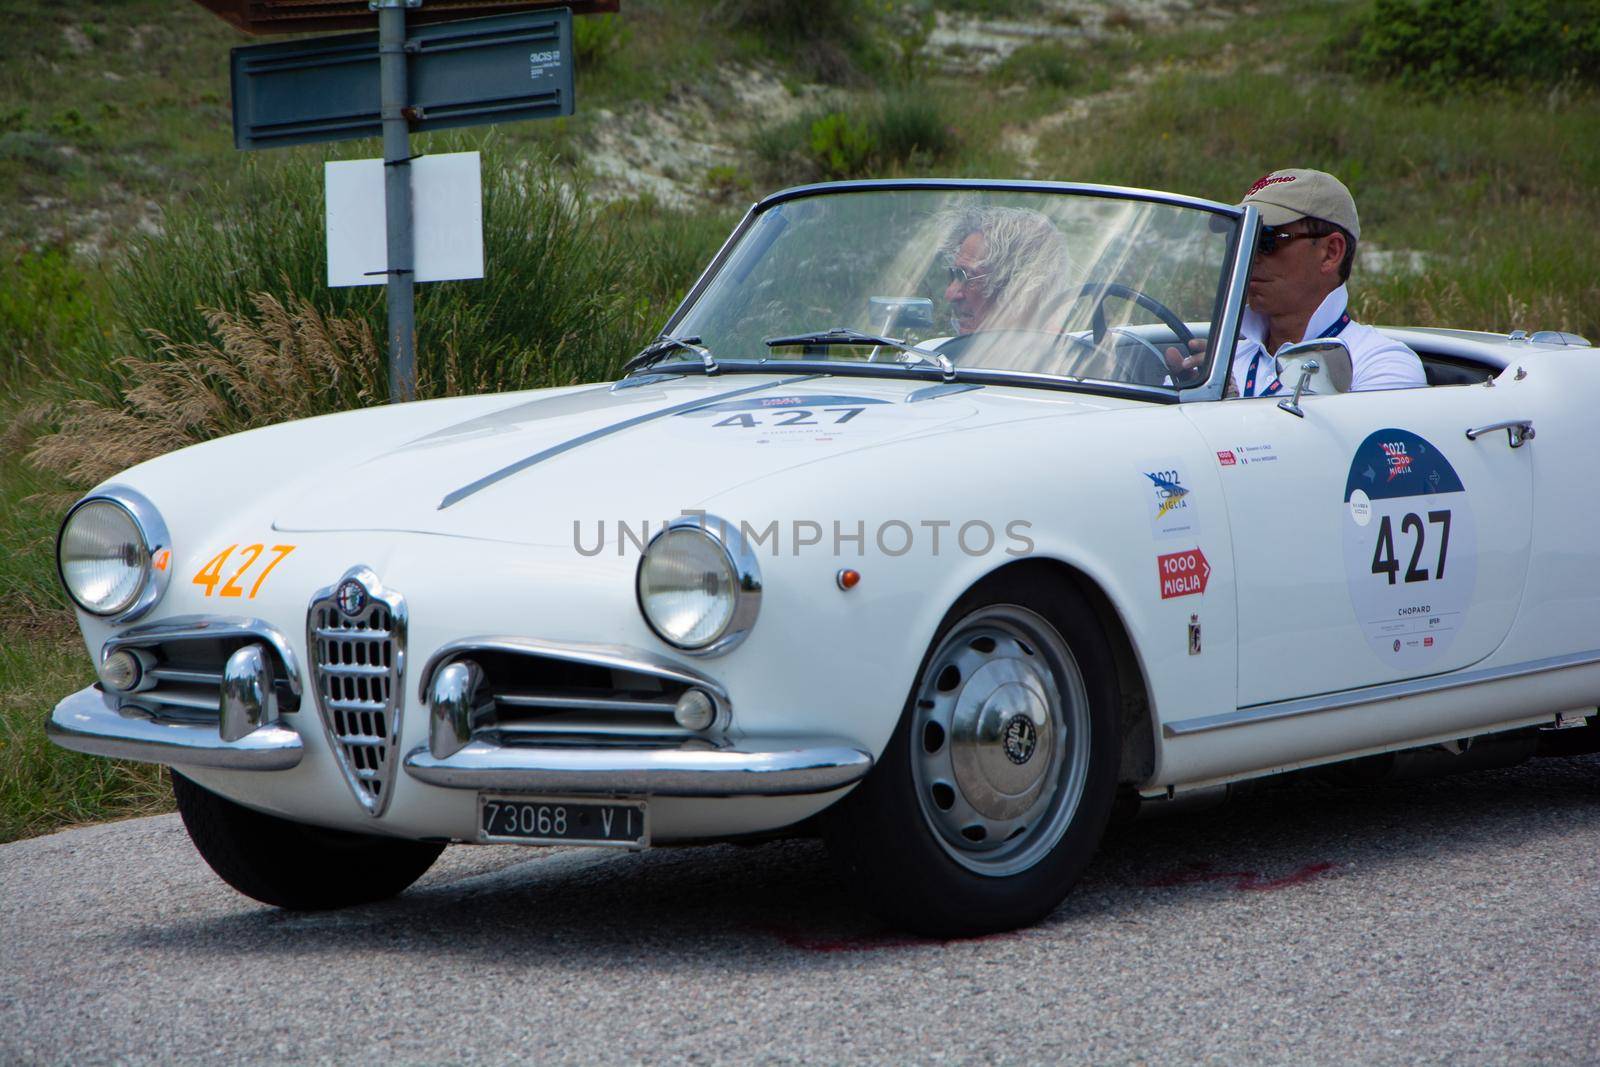 ALFA ROMEO GIULIETTA SPIDER 1957 on an old racing car in rally Mille Miglia 2022 the famous italian historical race (1927-1957 by massimocampanari